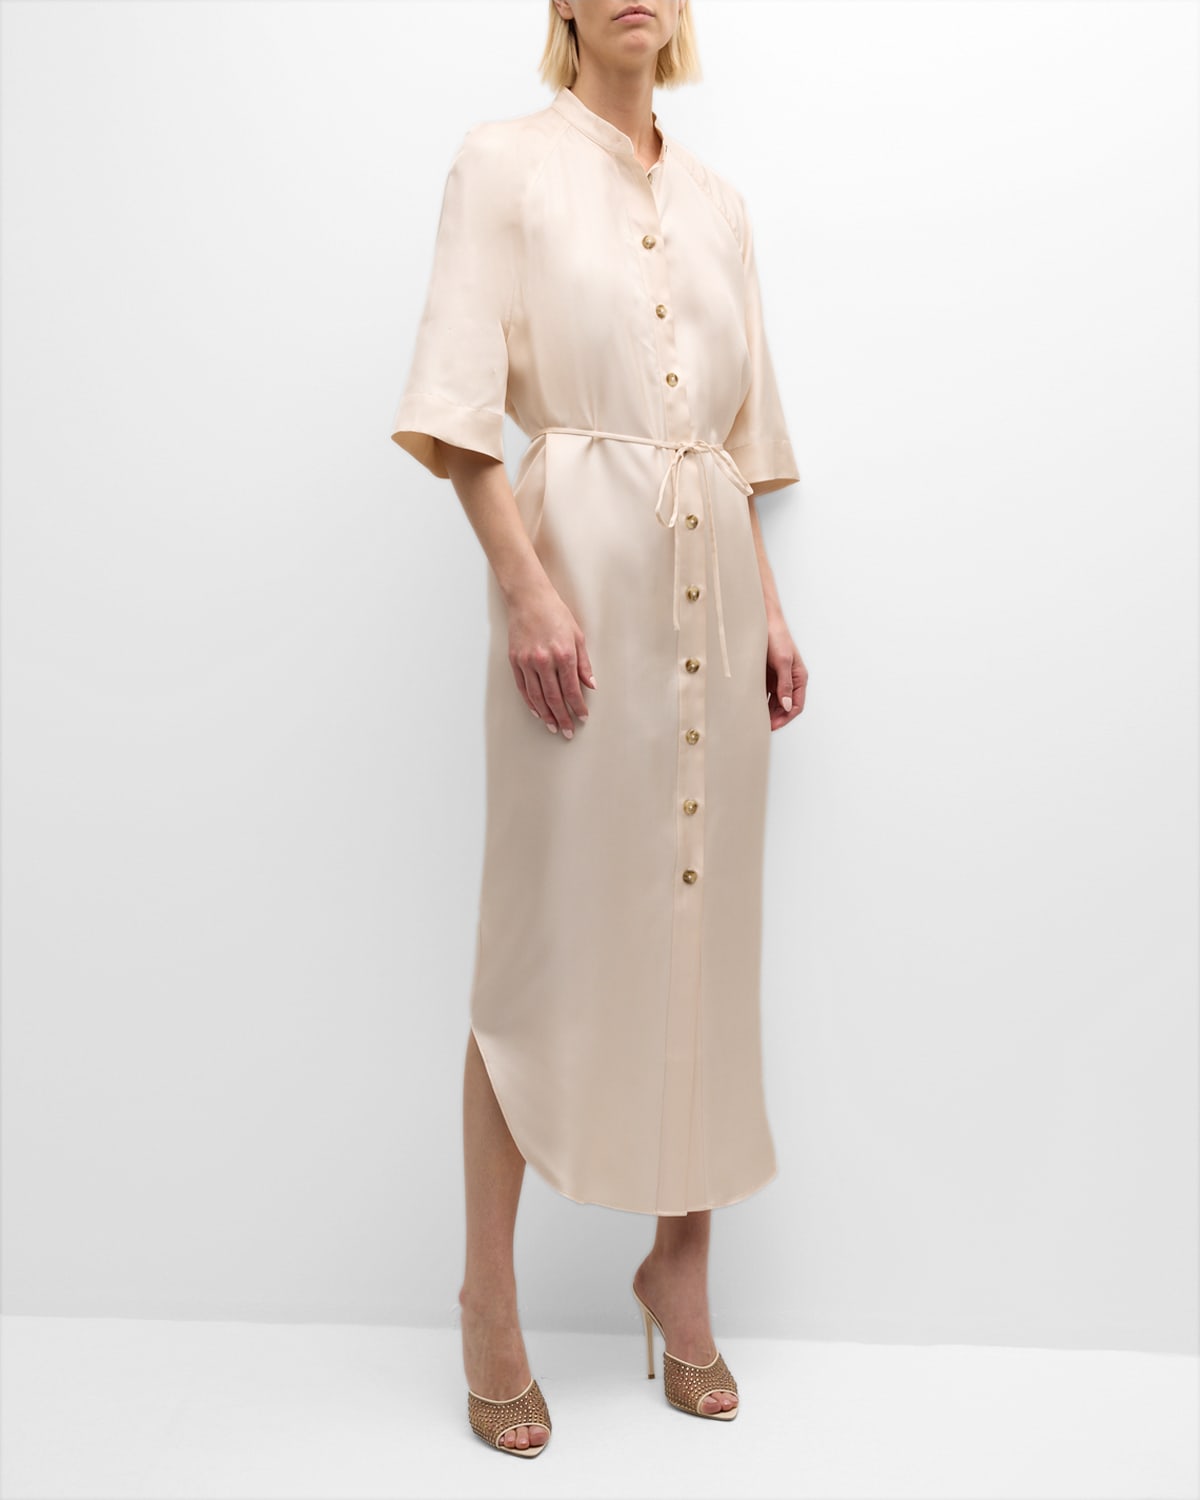 Loulou Studio Durion Button-front Maxi Shirtdress With Tie Belt In Cream Rose